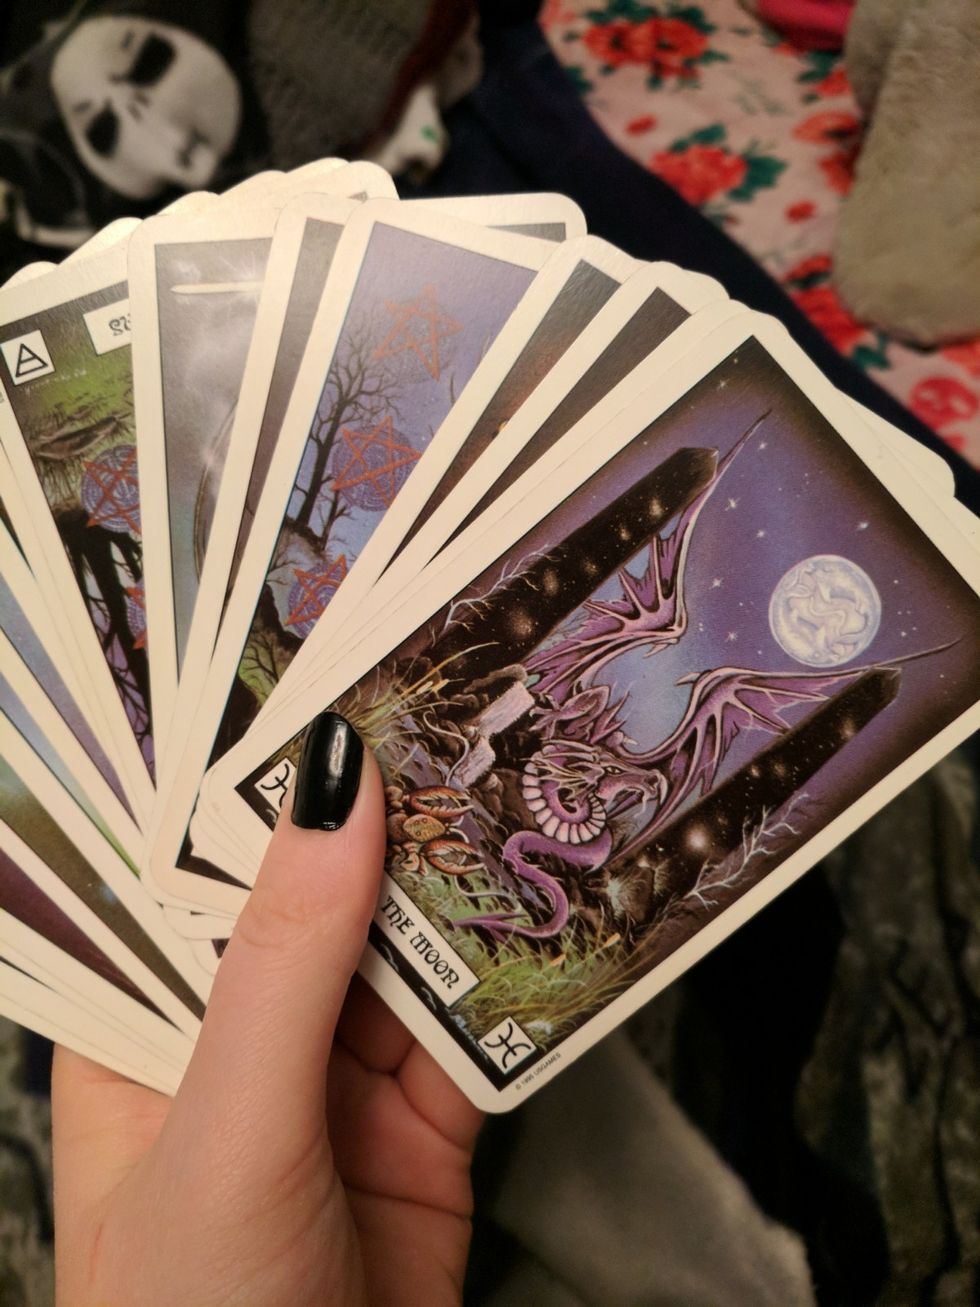 I Bought My First Tarot Deck and Here's What Happened